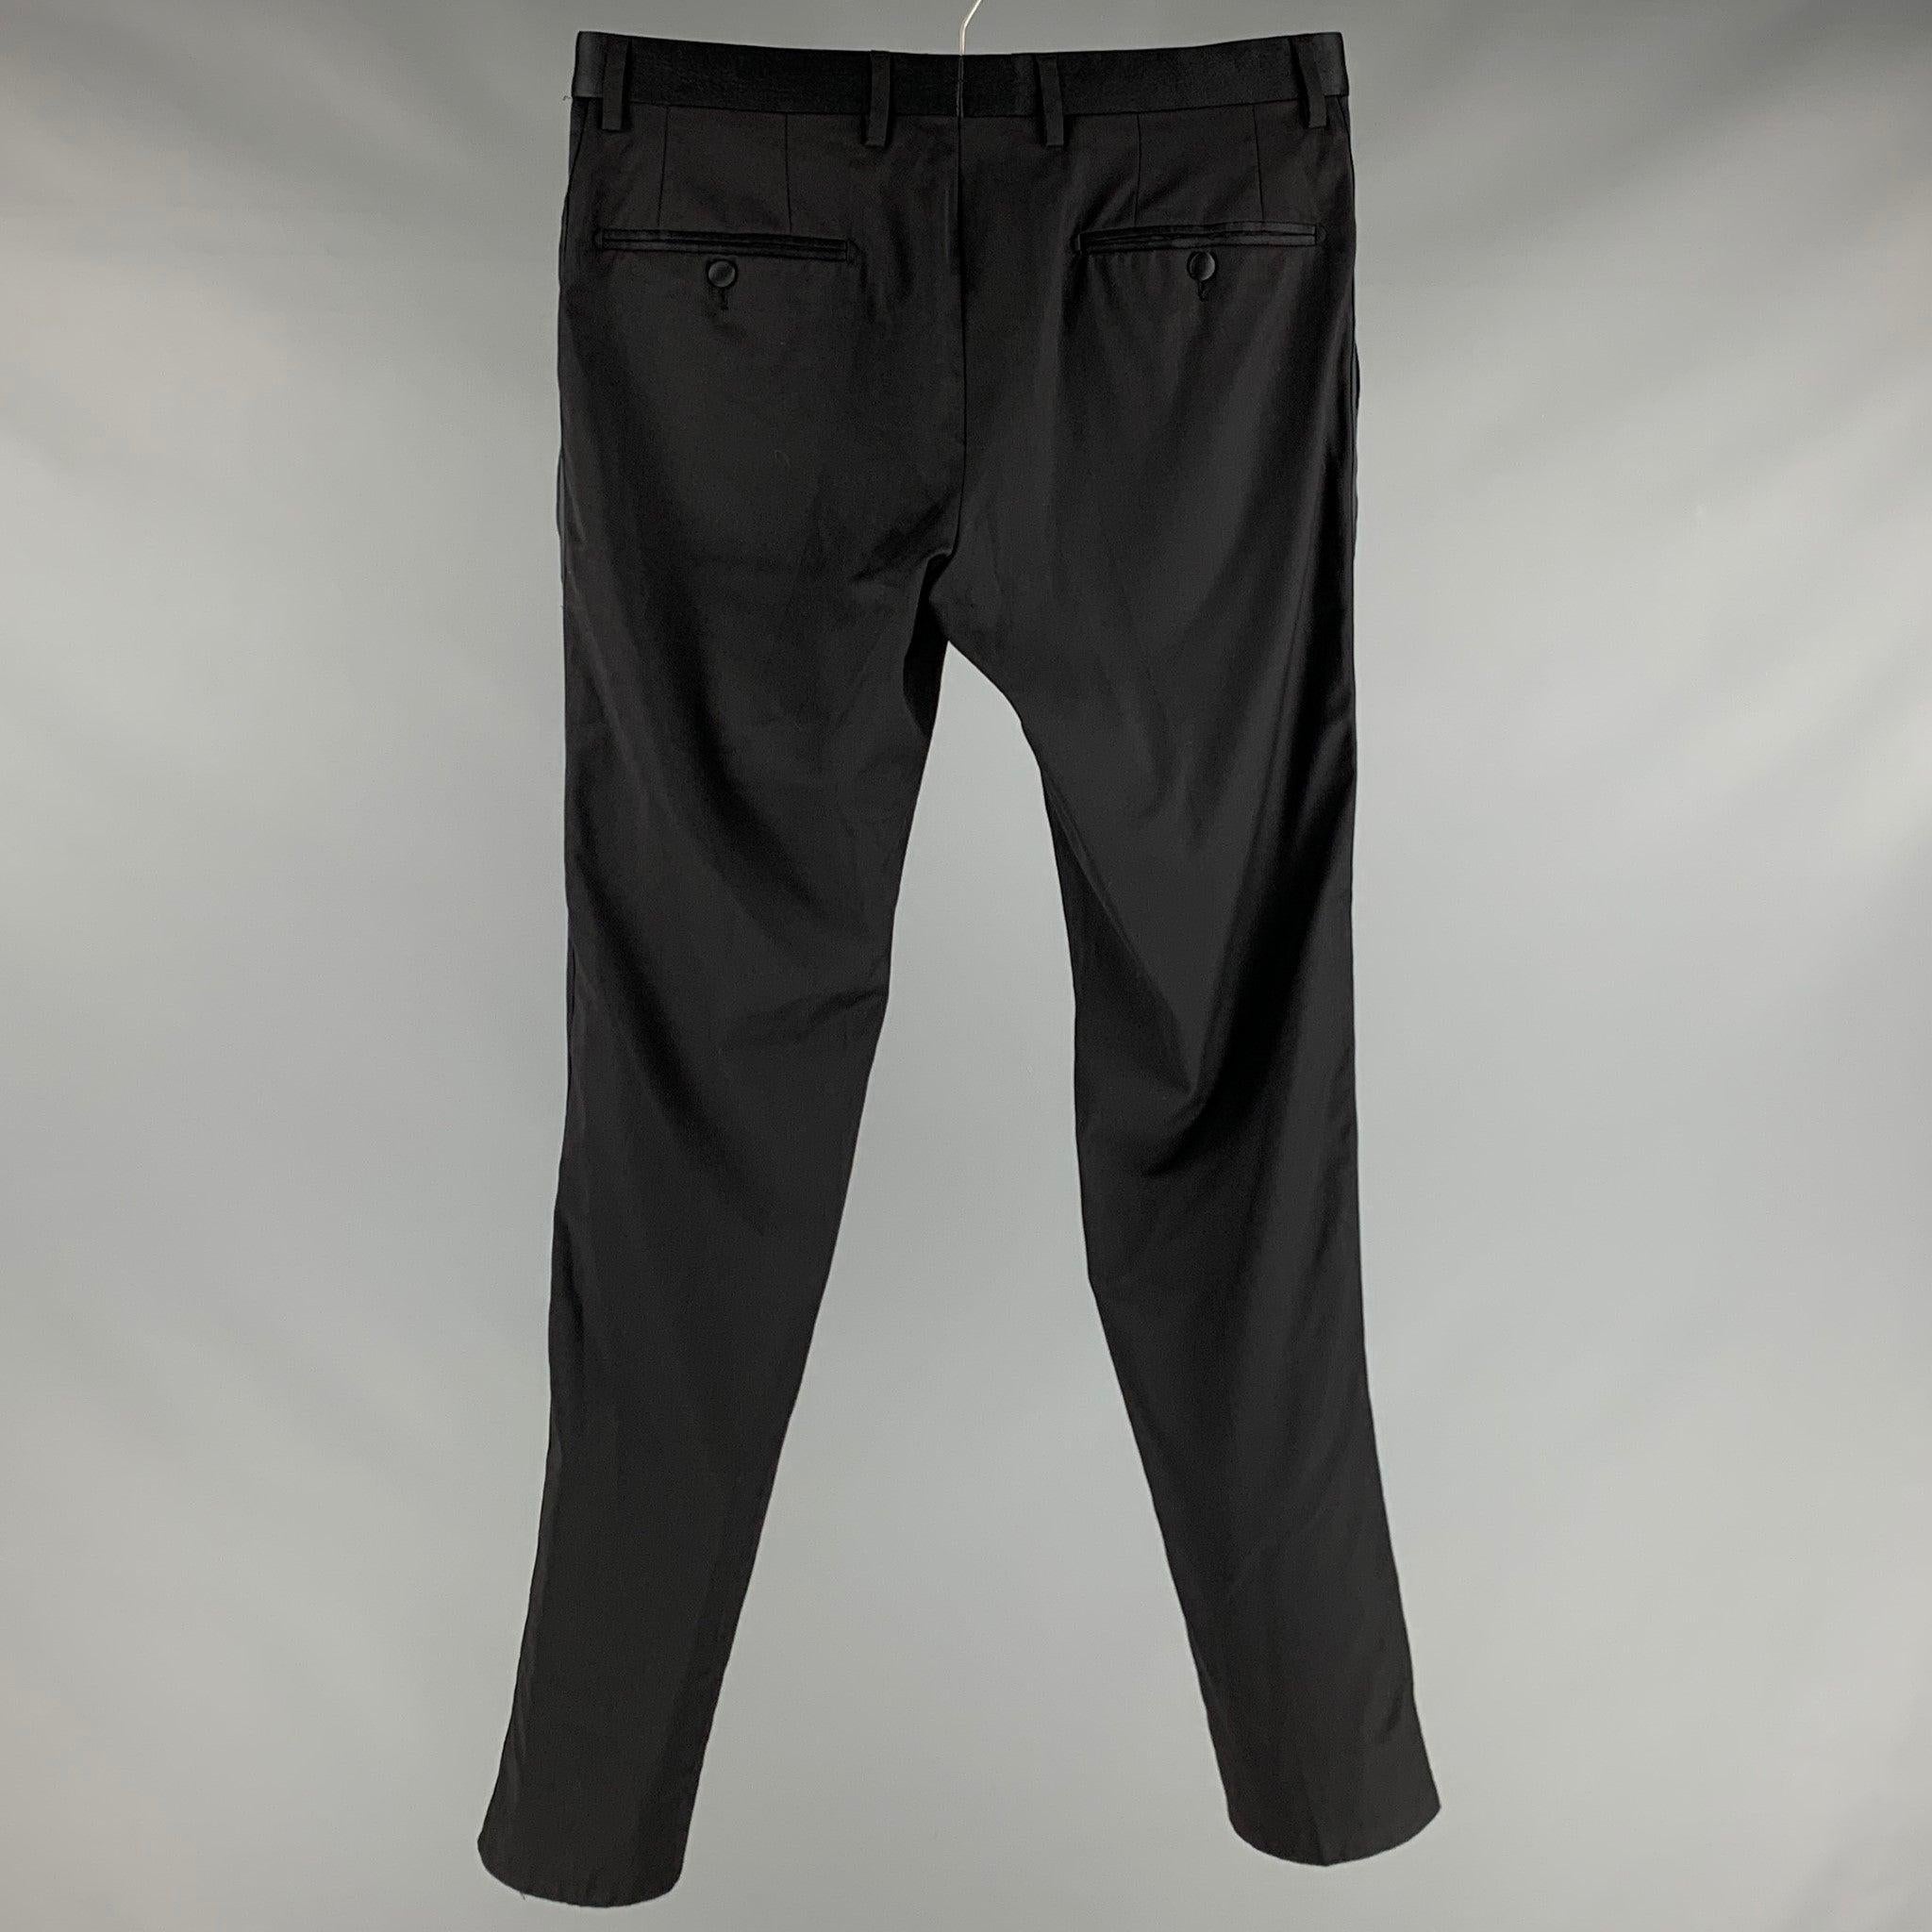 DOLCE & GABBANA Size 32 Black Wool Blend Tuxedo Dress Pants In Good Condition For Sale In San Francisco, CA